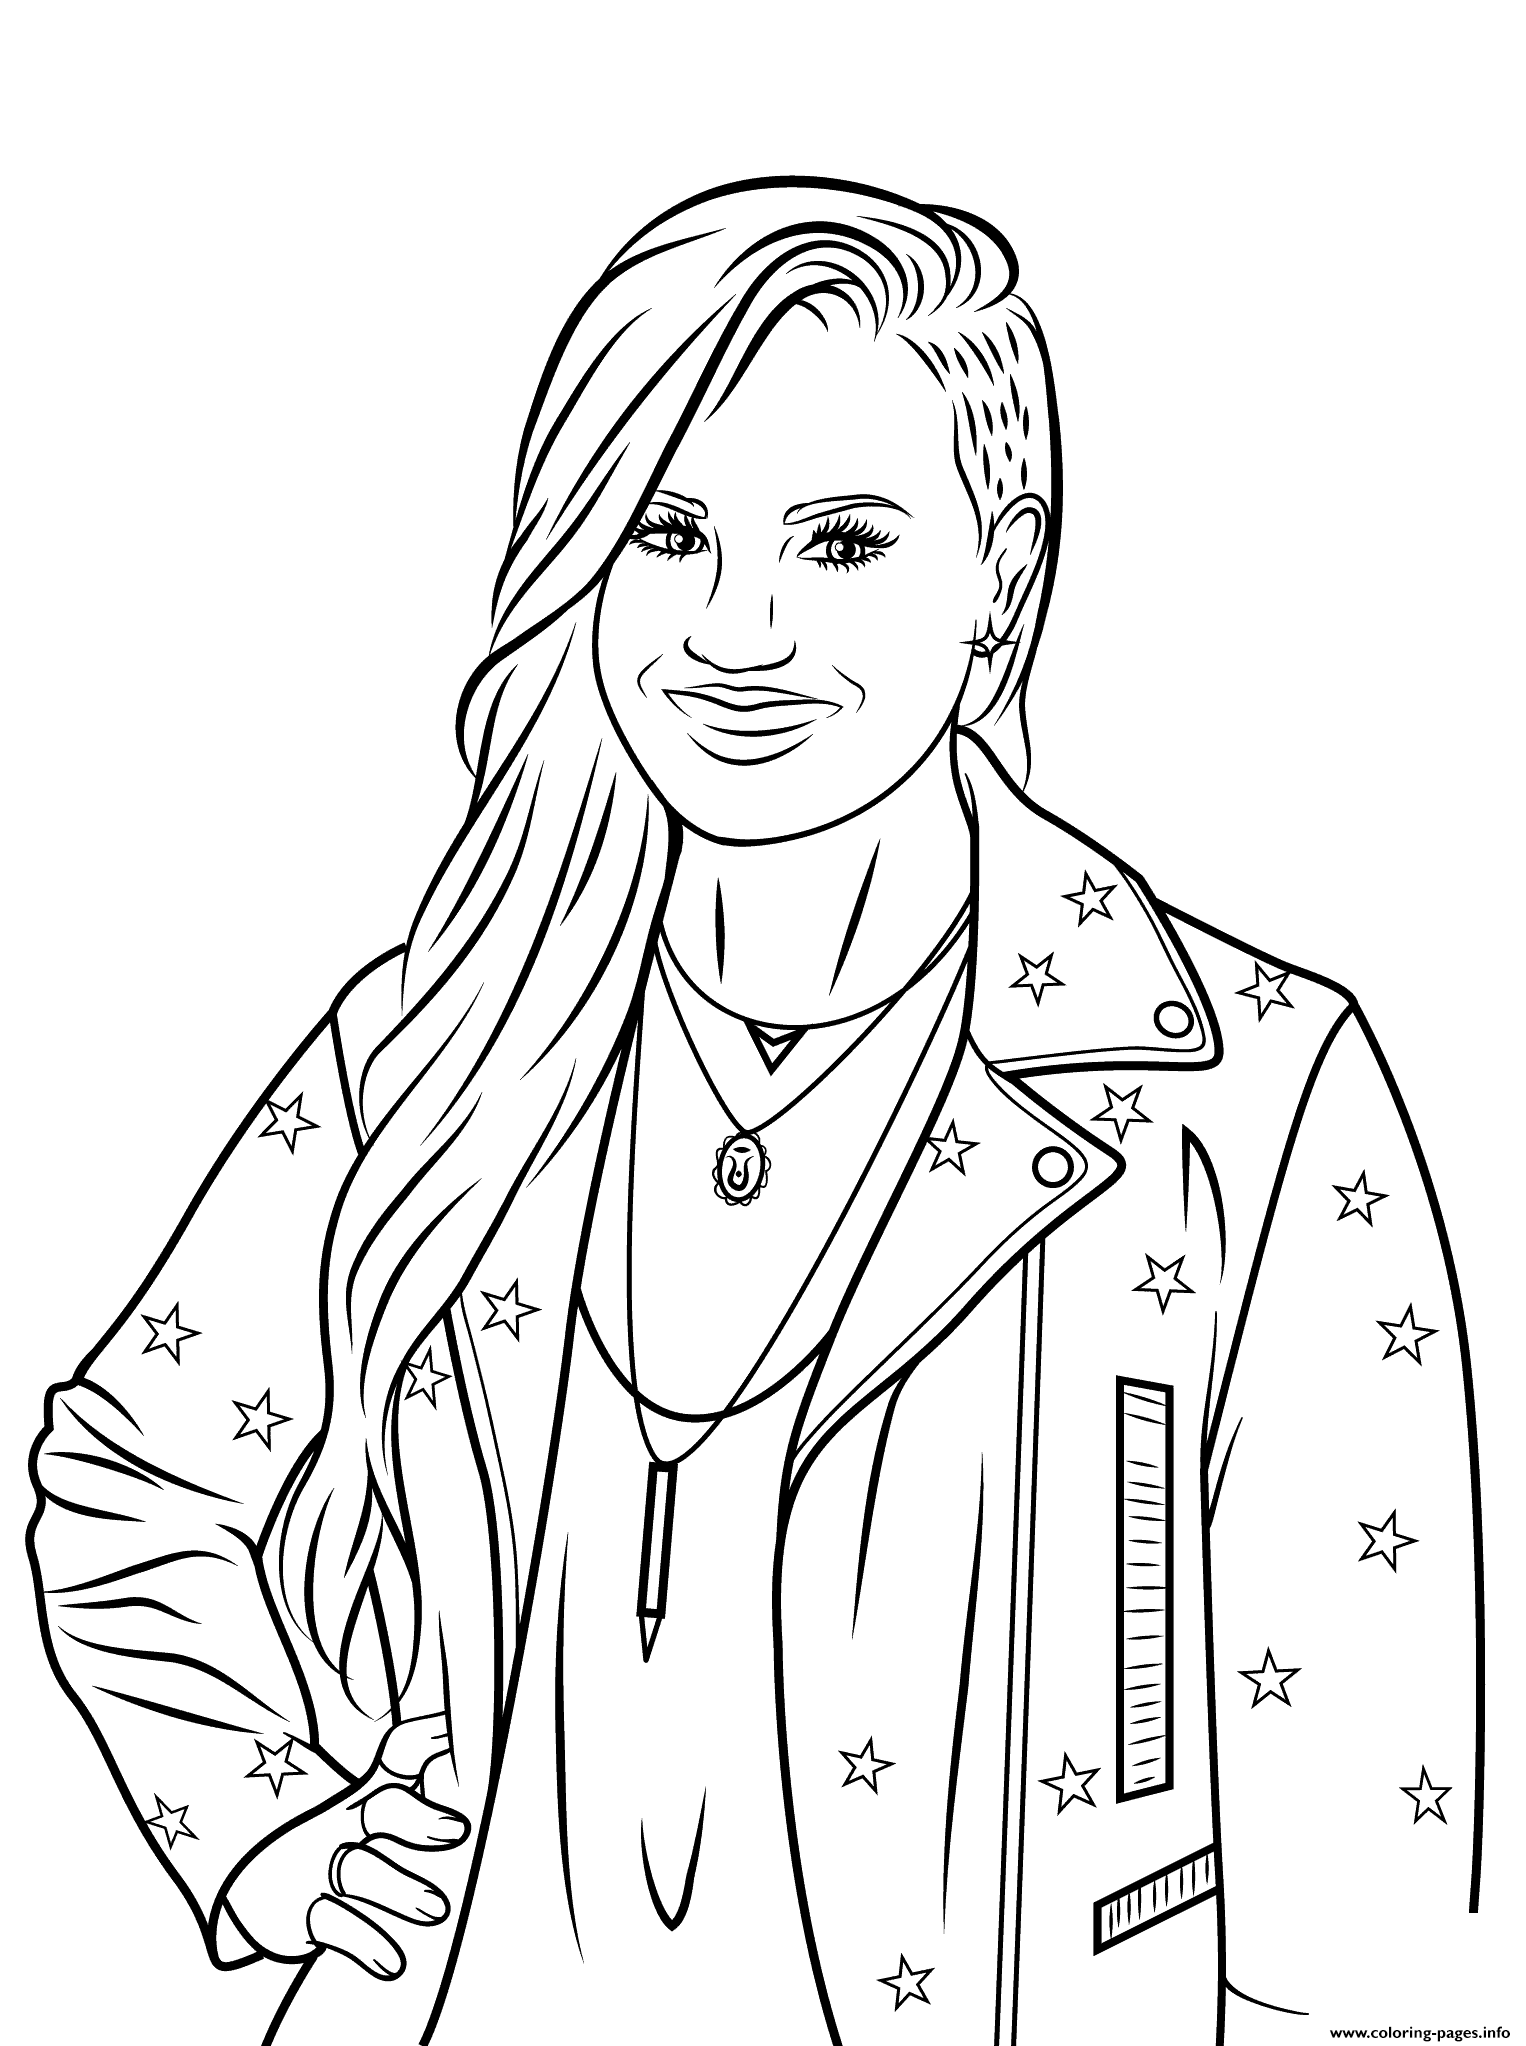 Demi Lovato Celebrity Coloring Pages Printable Online